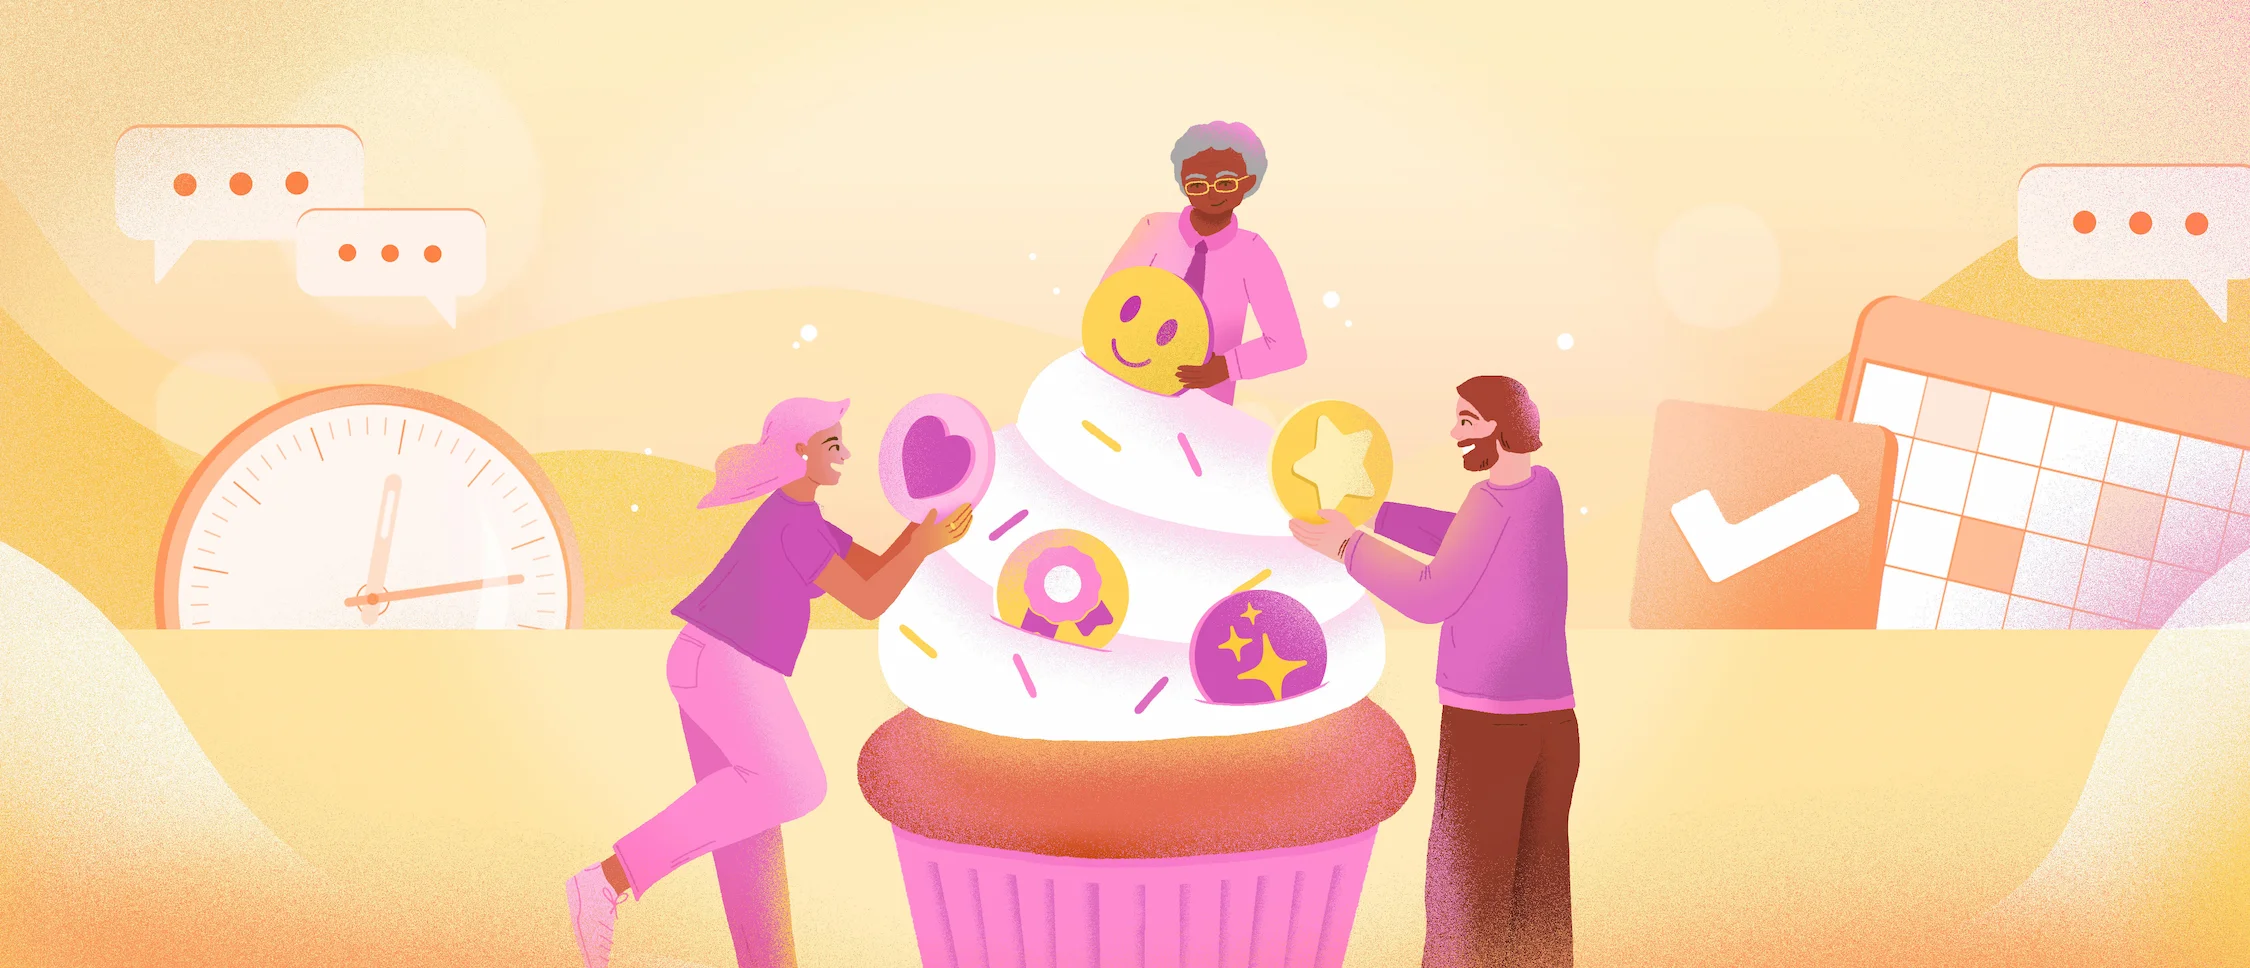 Three people decorate a cupcake icing with a smiley face, star, heart and other elements.